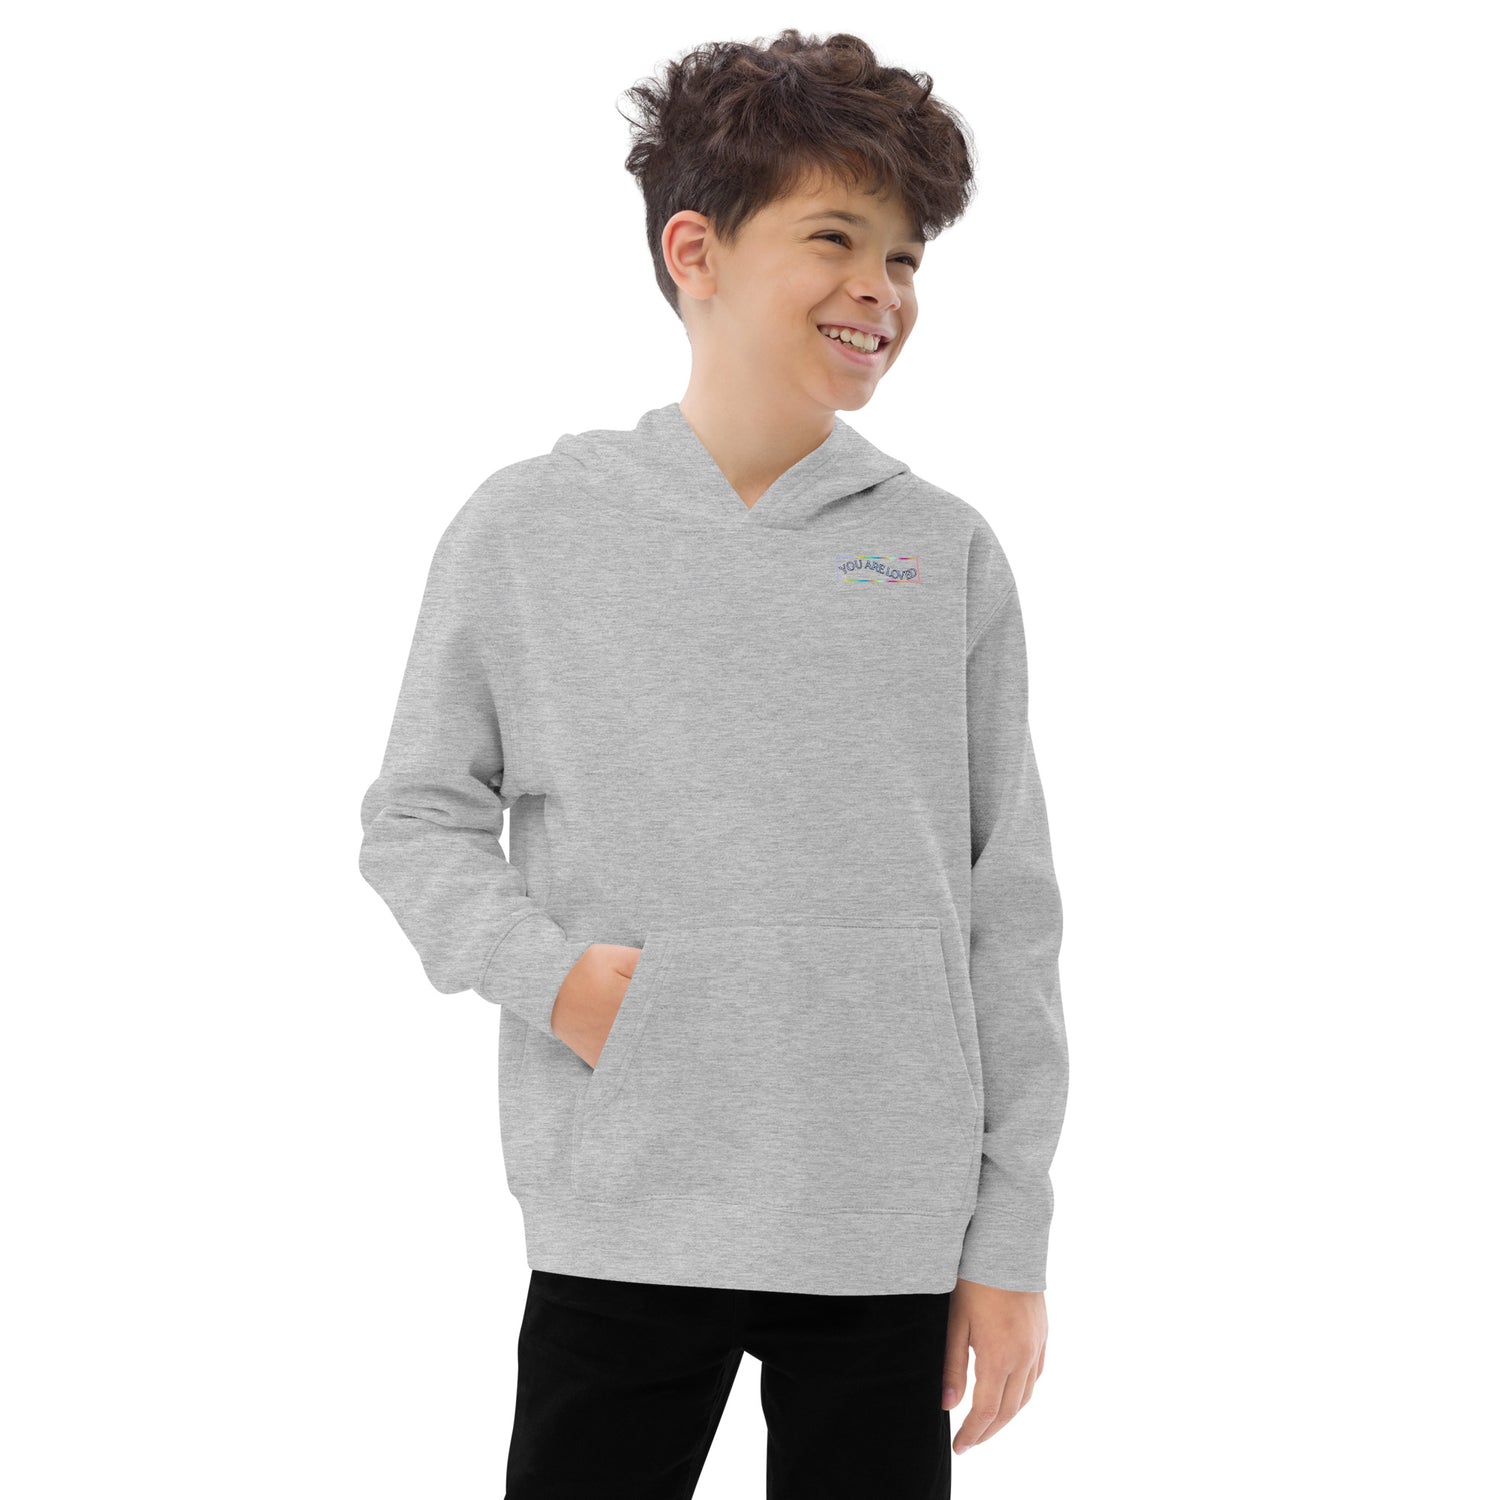 Grey Kidswear hoodie with pockets at front features a vibrant design that says "You're loved".